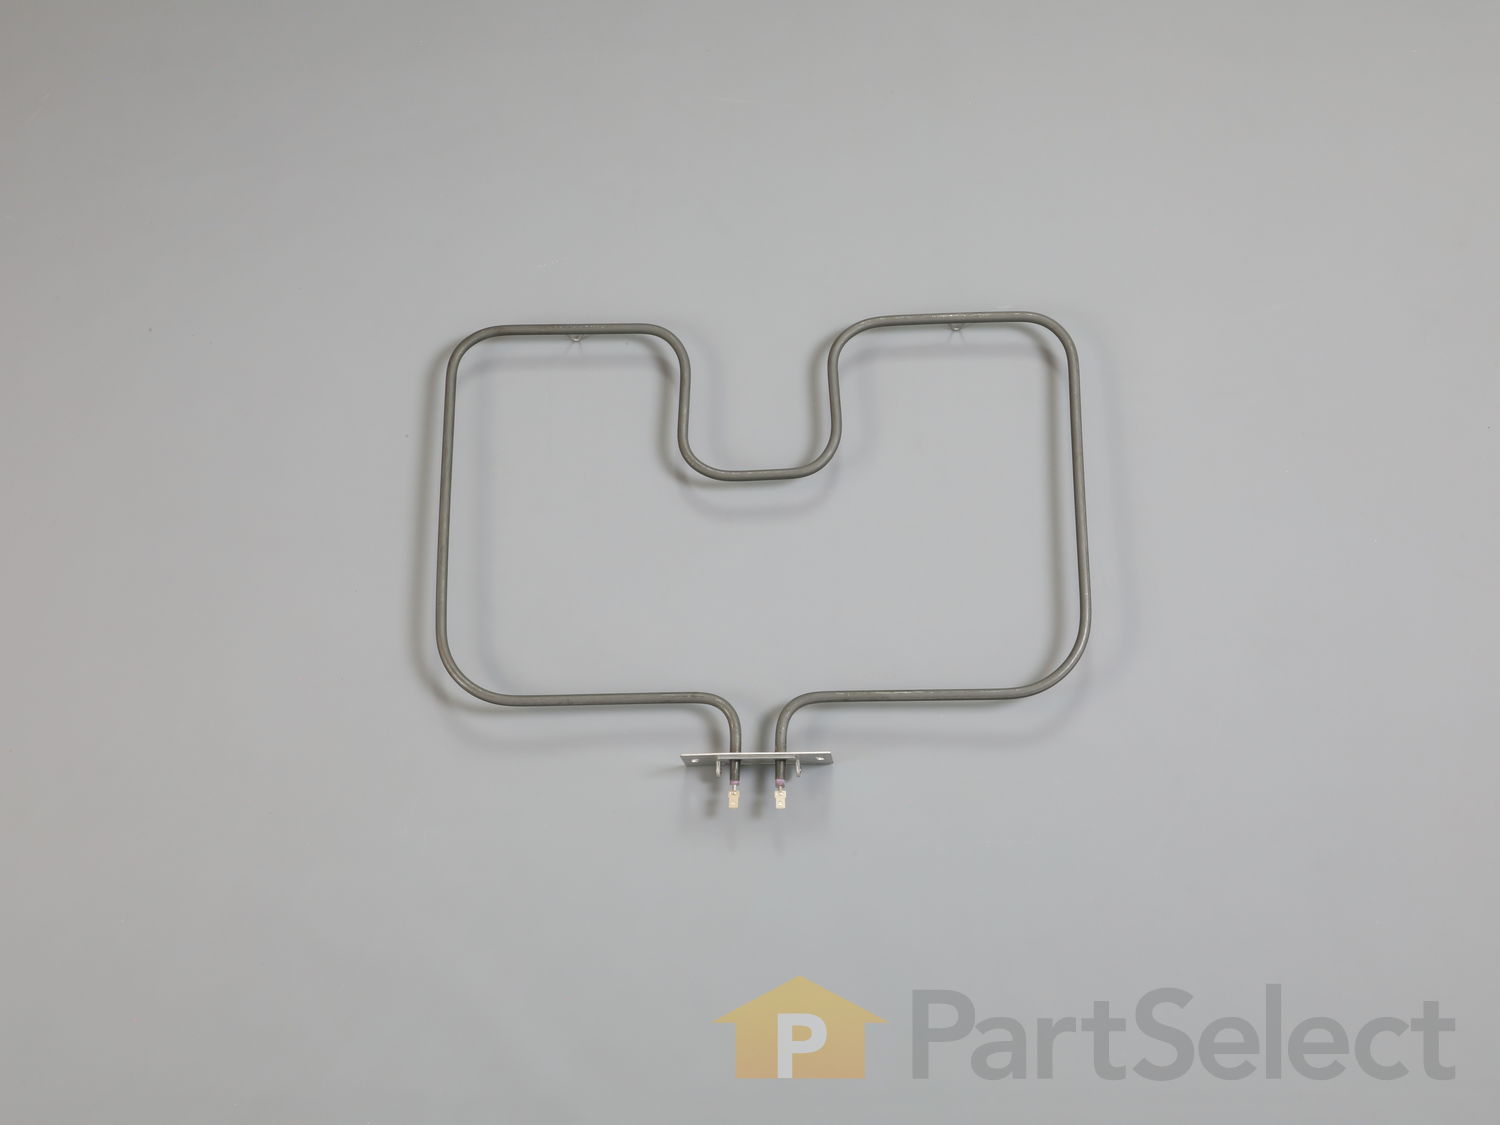 CH978 Range Oven Lower Bake Heating Element Unit for Frigidaire 5309950885 